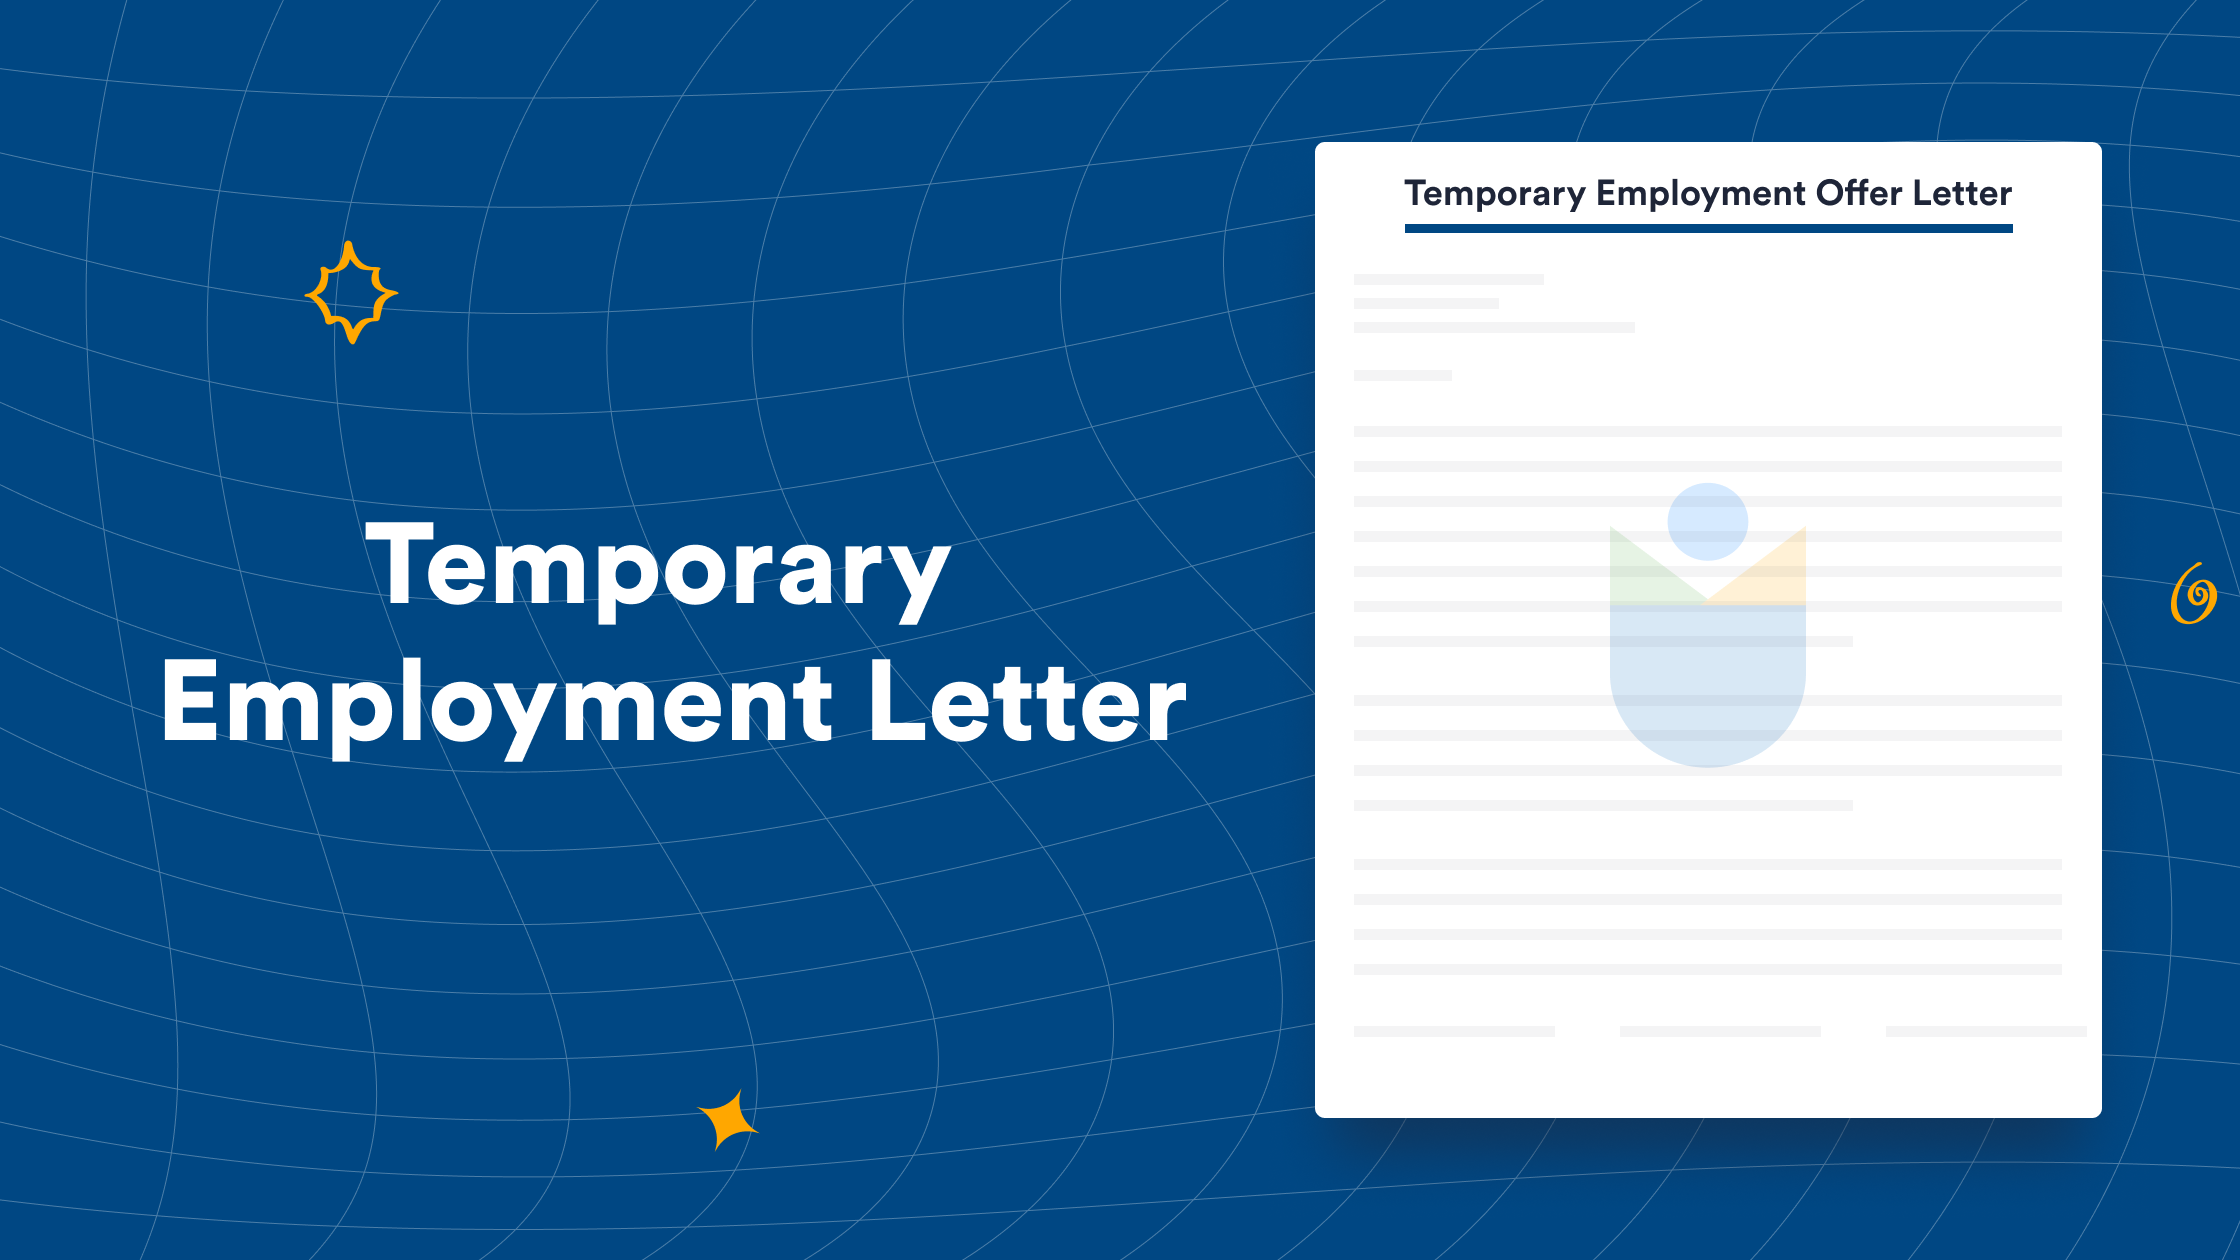 Temporary Employment Offer Letter